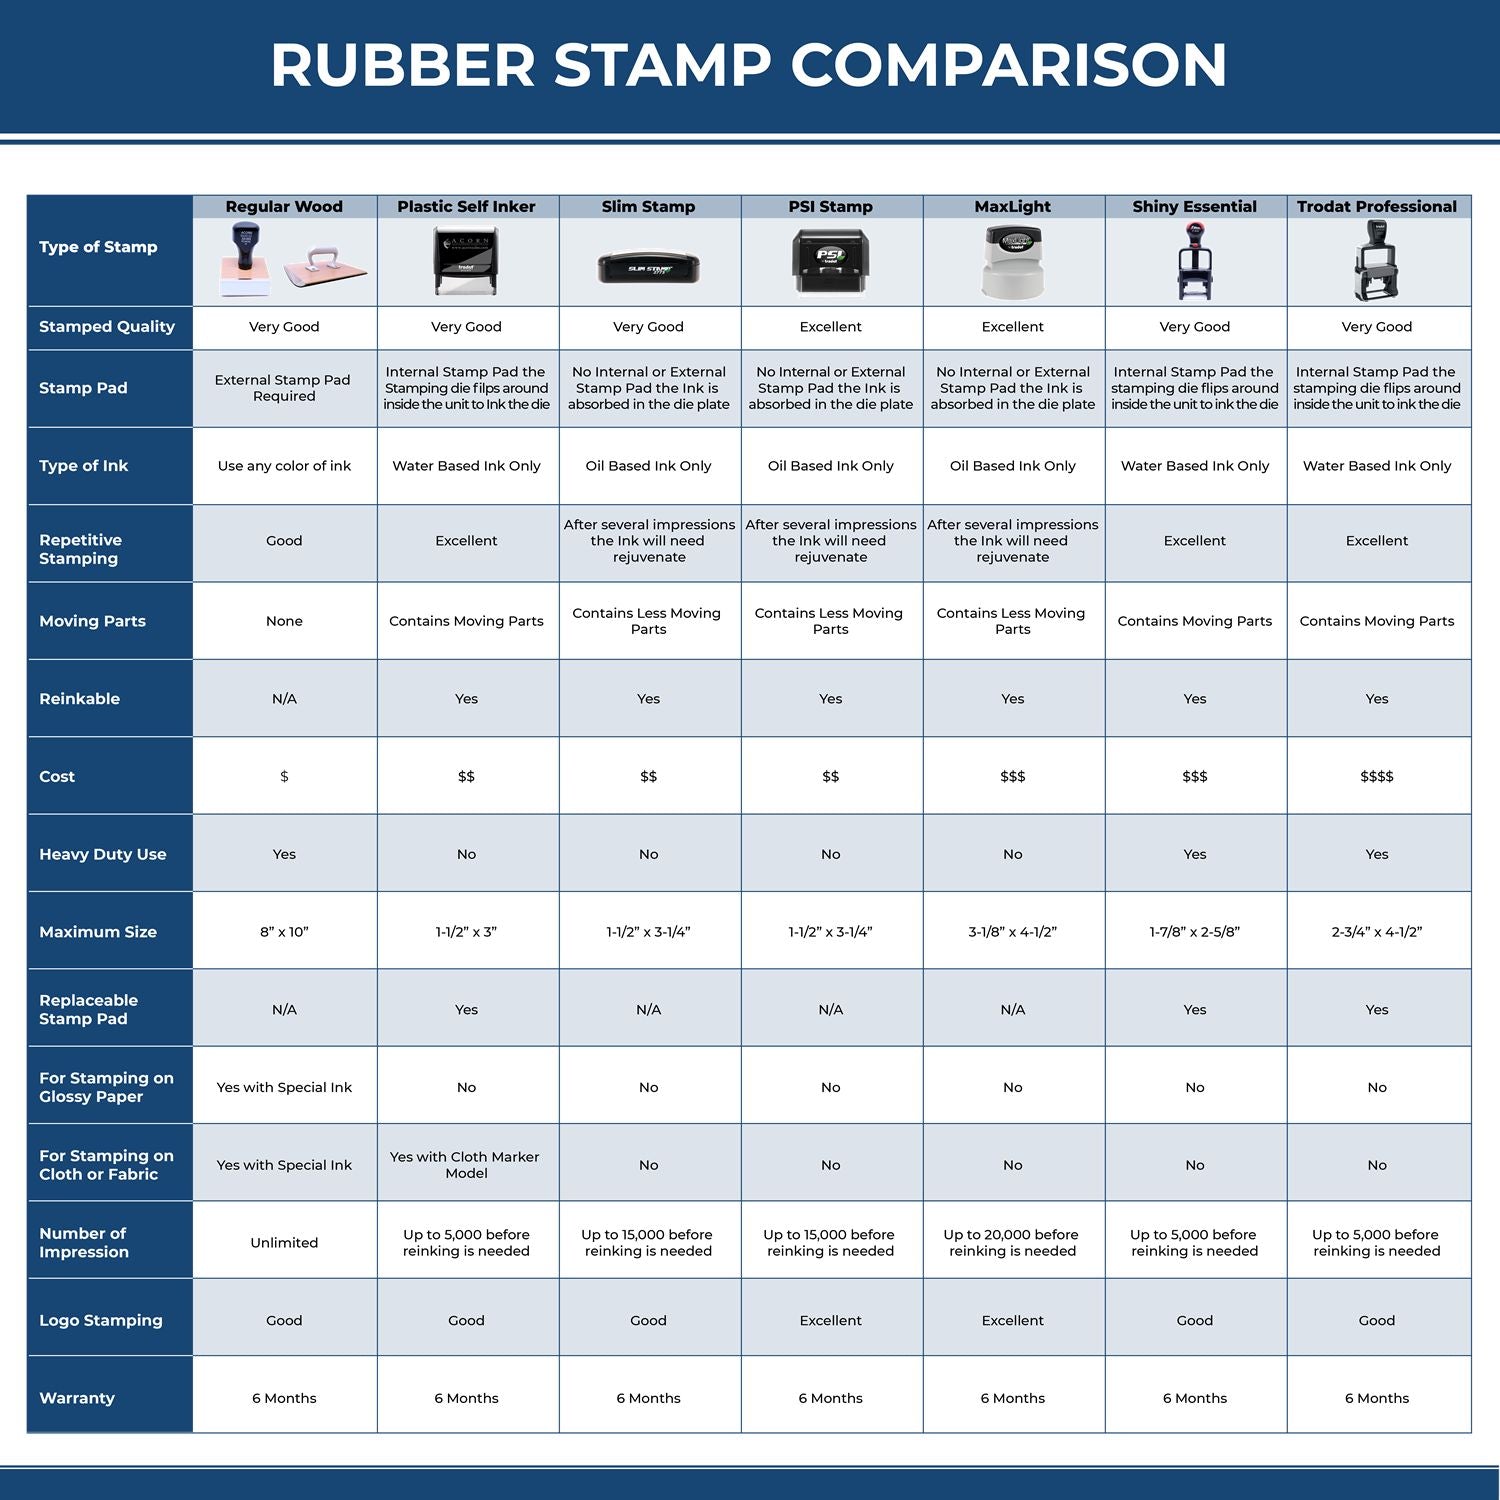 Large Self-Inking Archivado Stamp 5536S Rubber Stamp Comparison